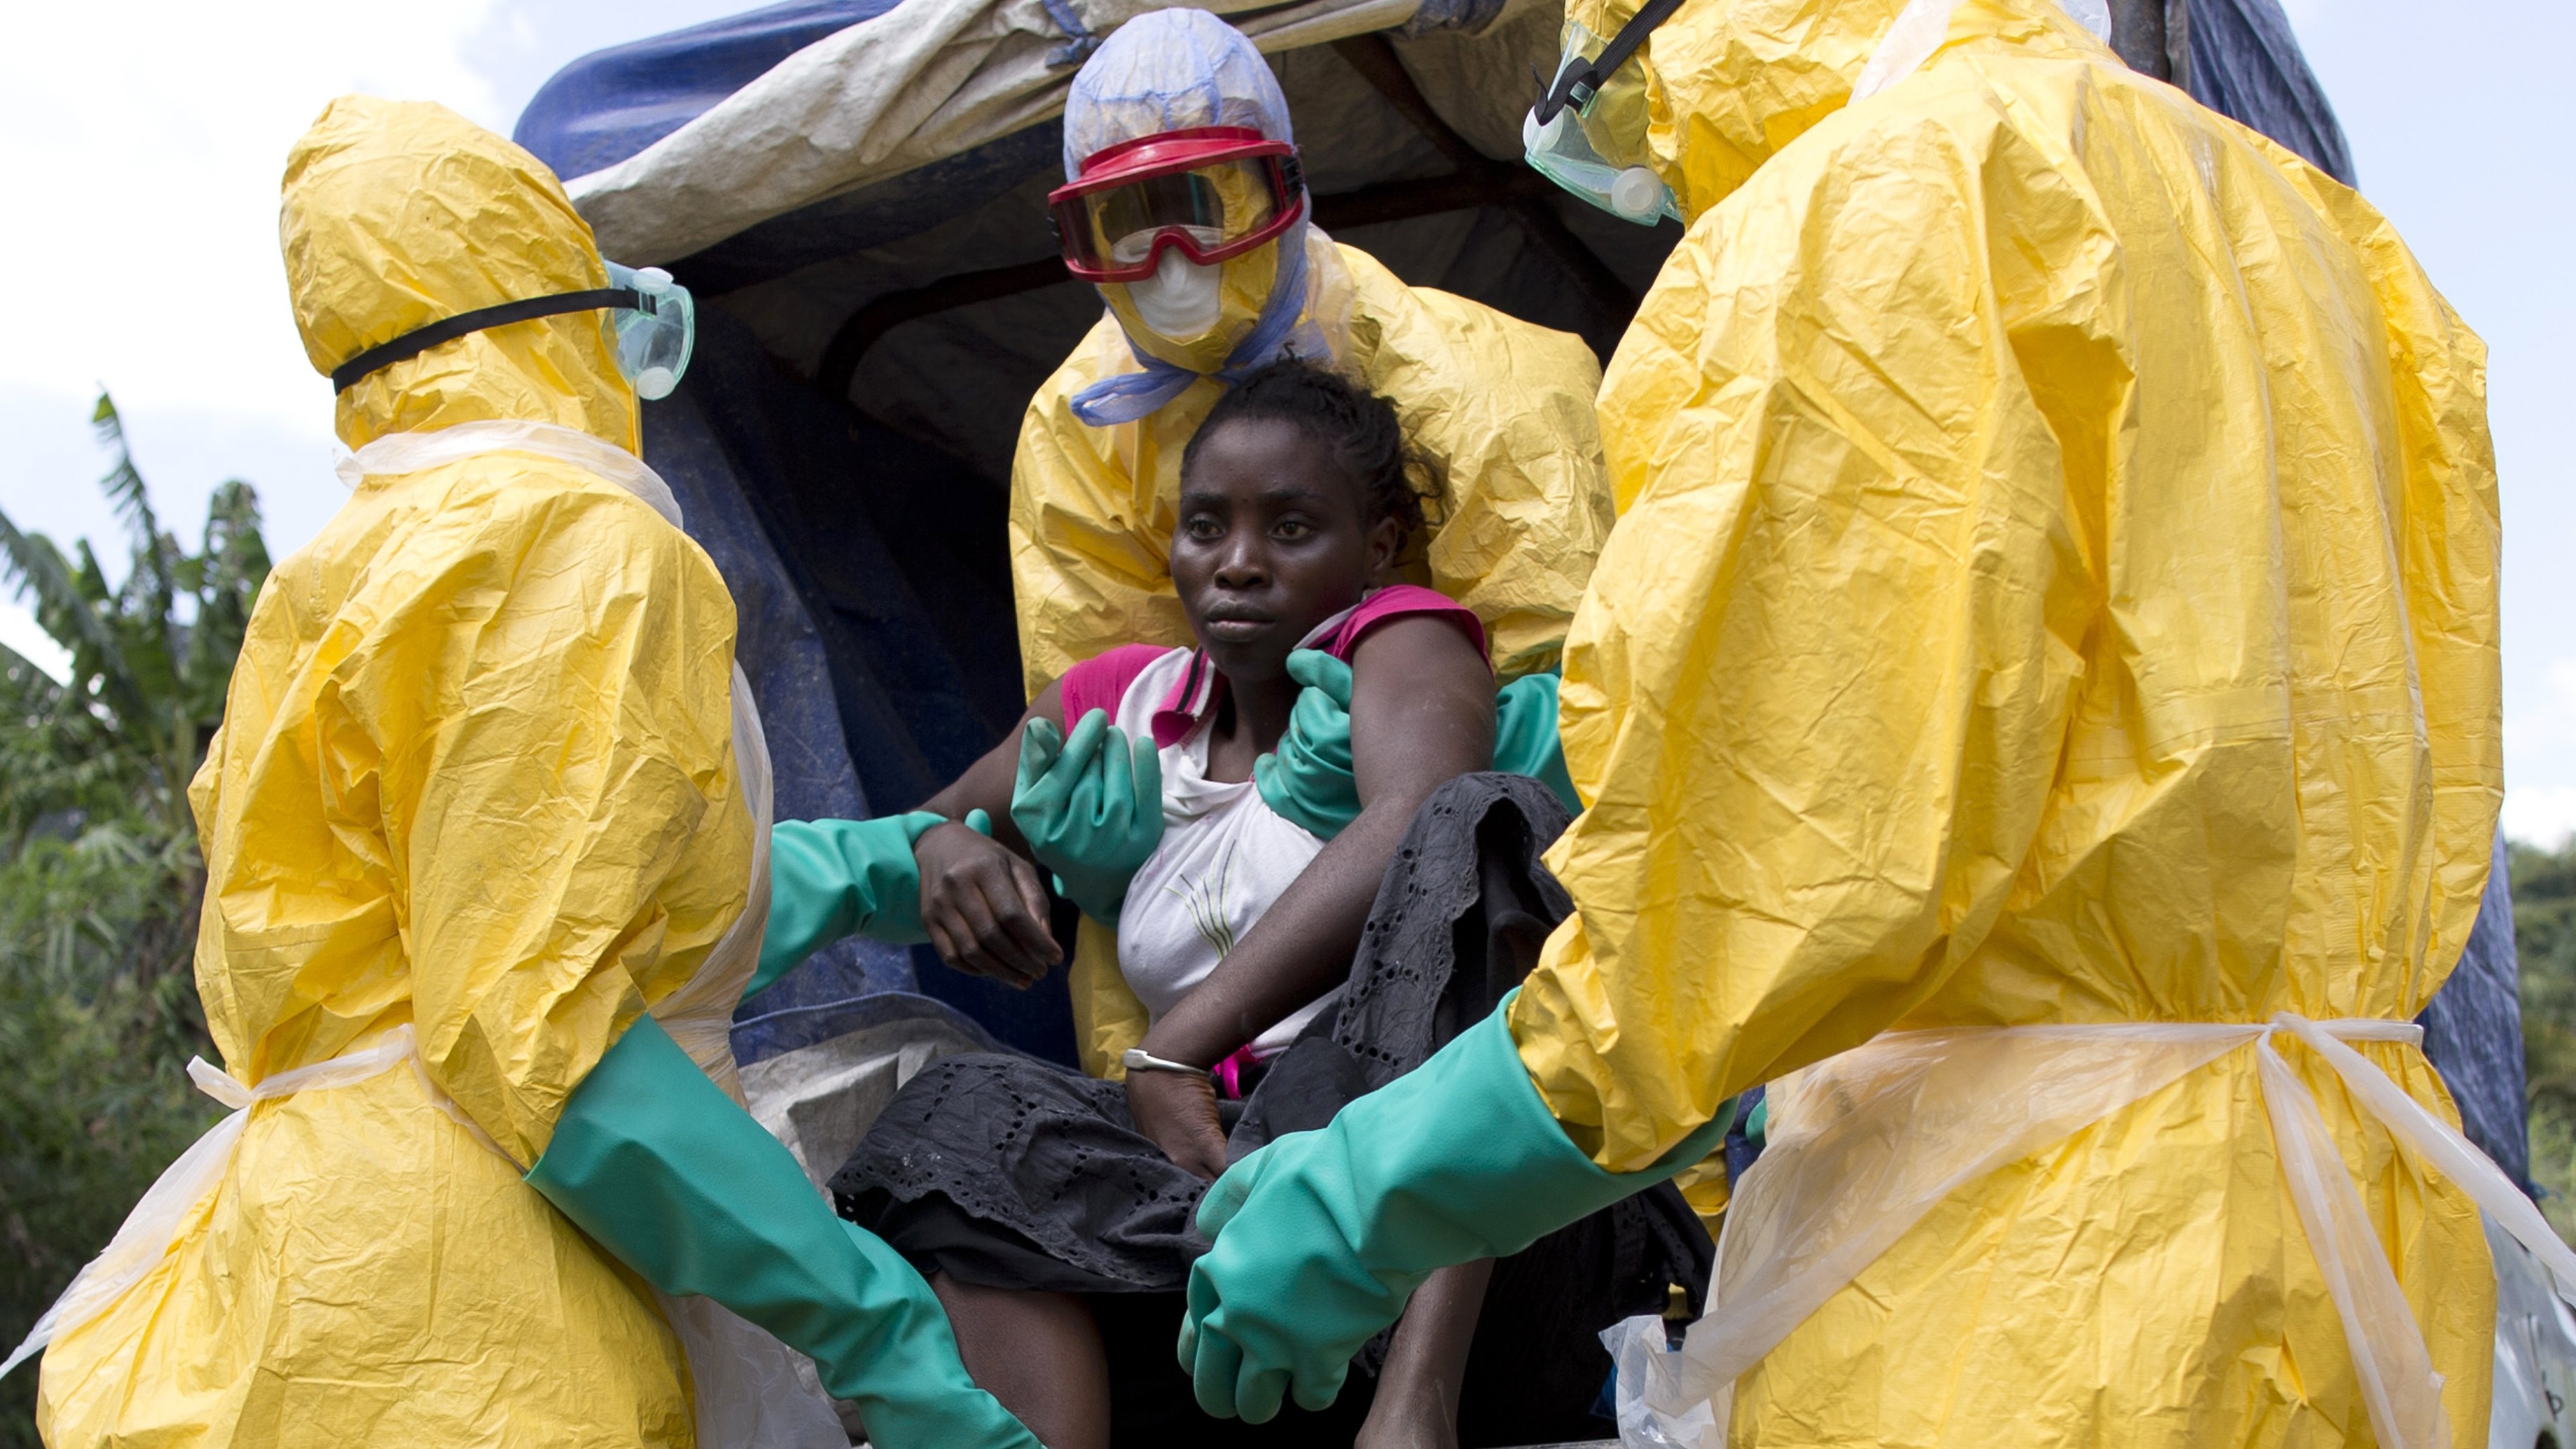 A woman suspected of suffering from Ebola is helped into a van by aid workers.